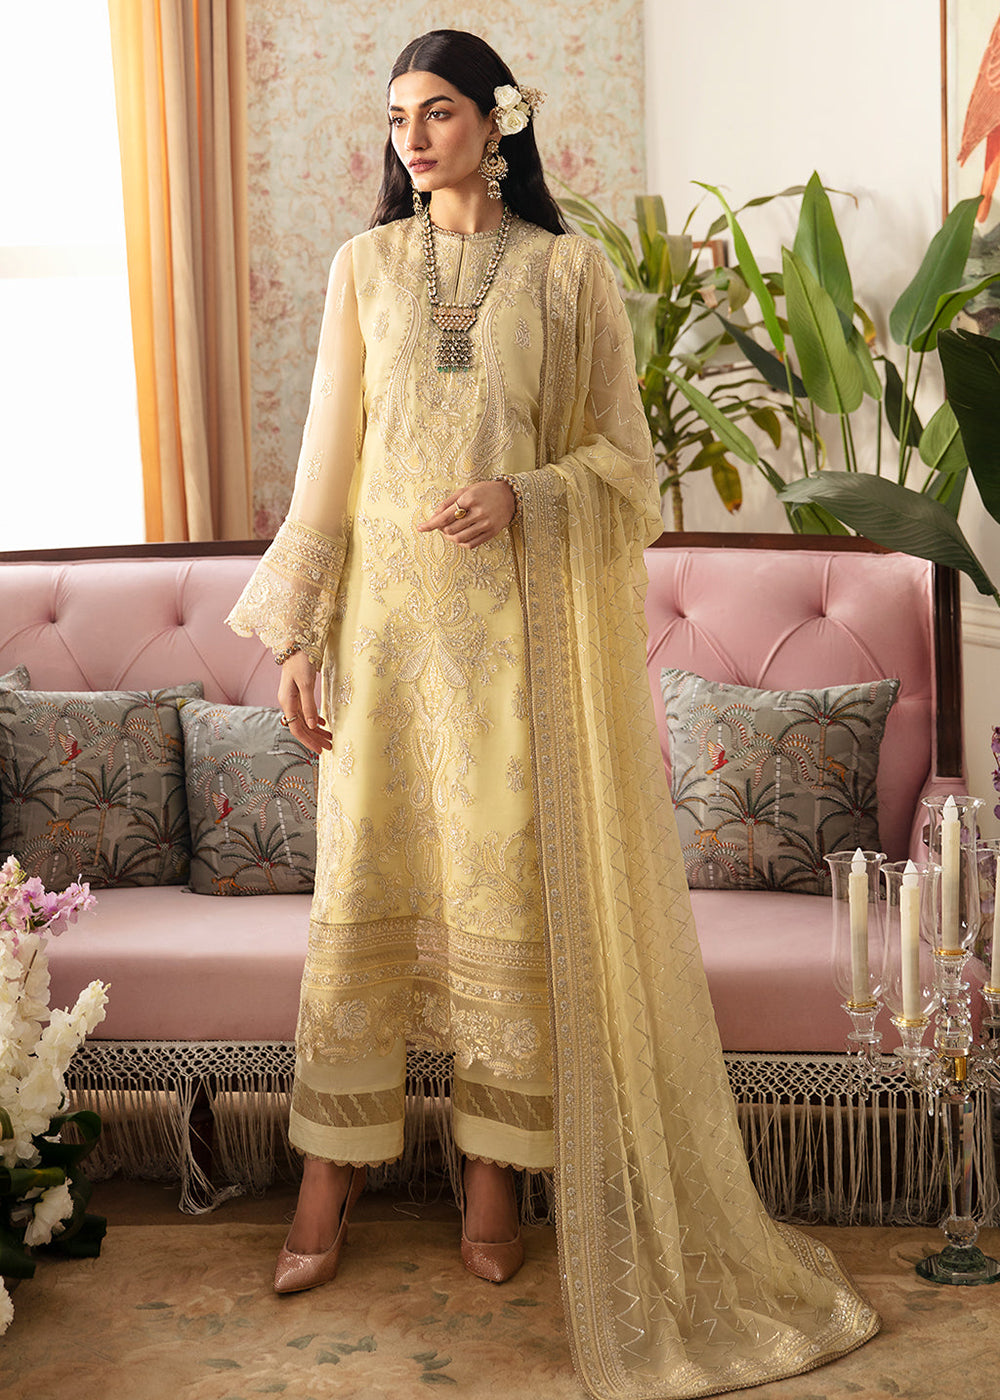 Buy Now The Whispers of Grandeur Luxury Formals '24 by Ayzel | MALVA Online at Empress Online in USA, UK, Canada & Worldwide at Empress Clothing.